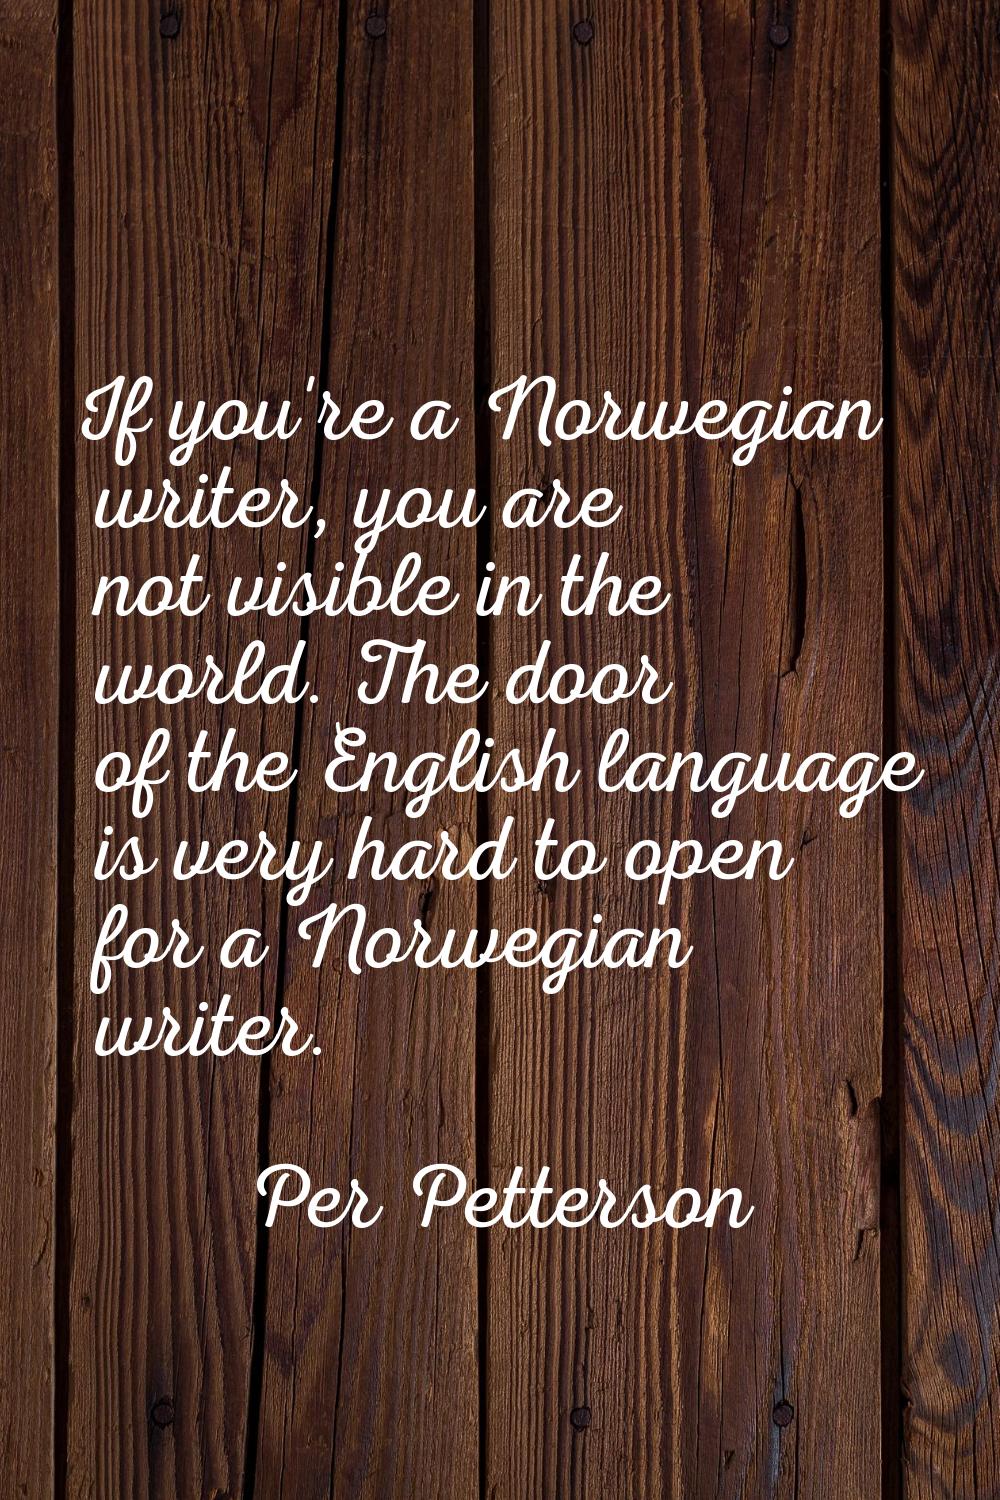 If you're a Norwegian writer, you are not visible in the world. The door of the English language is